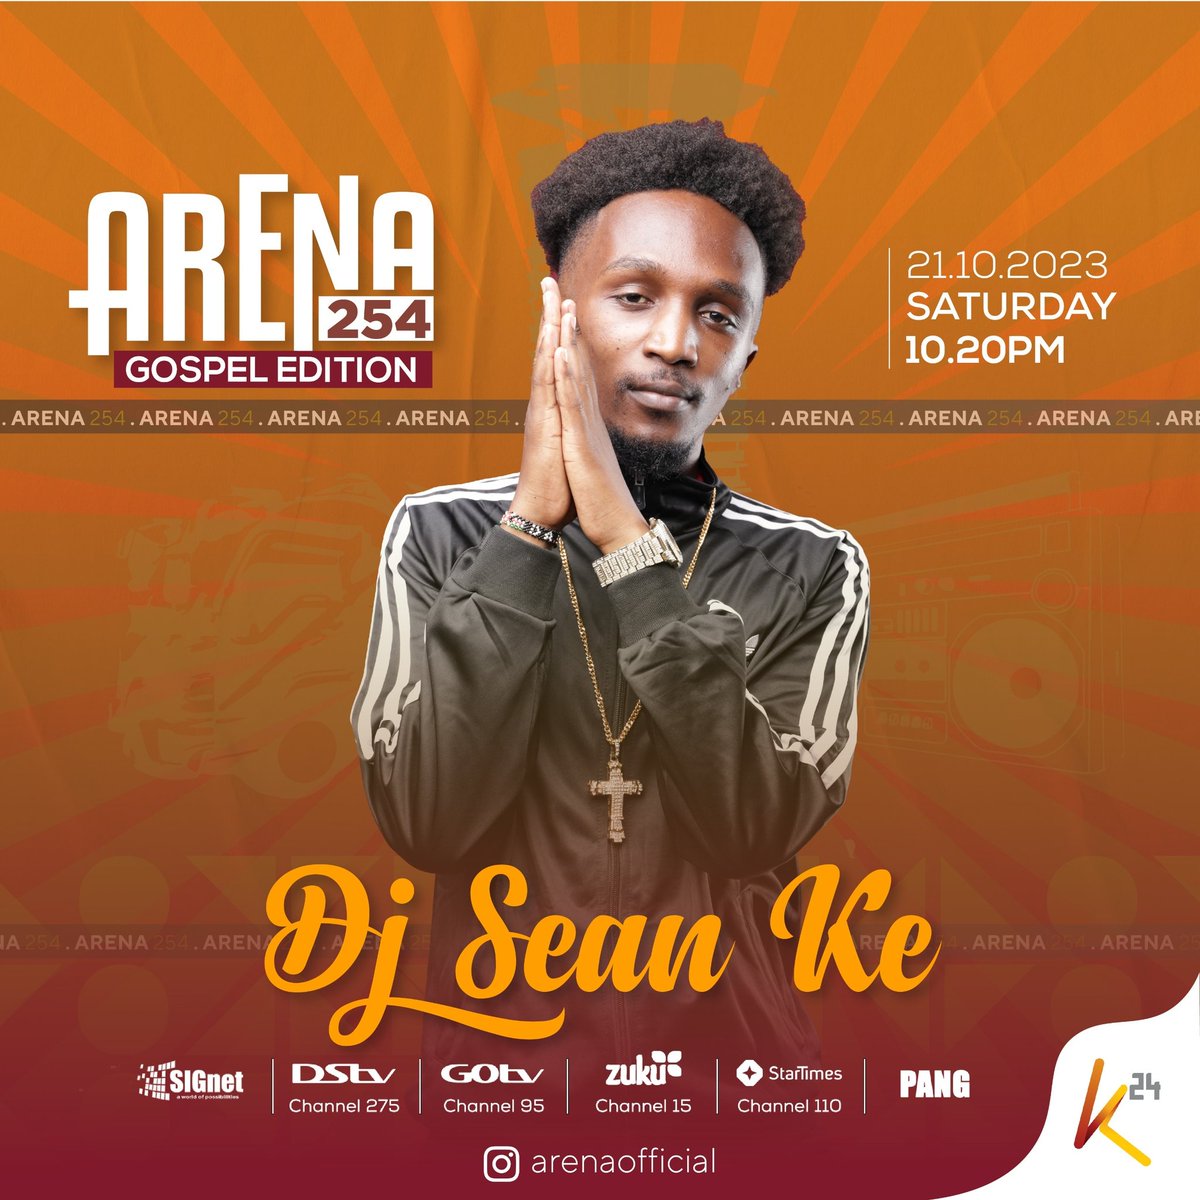 Guest DJ on #Arena254 Tune in, let's get blessed together!